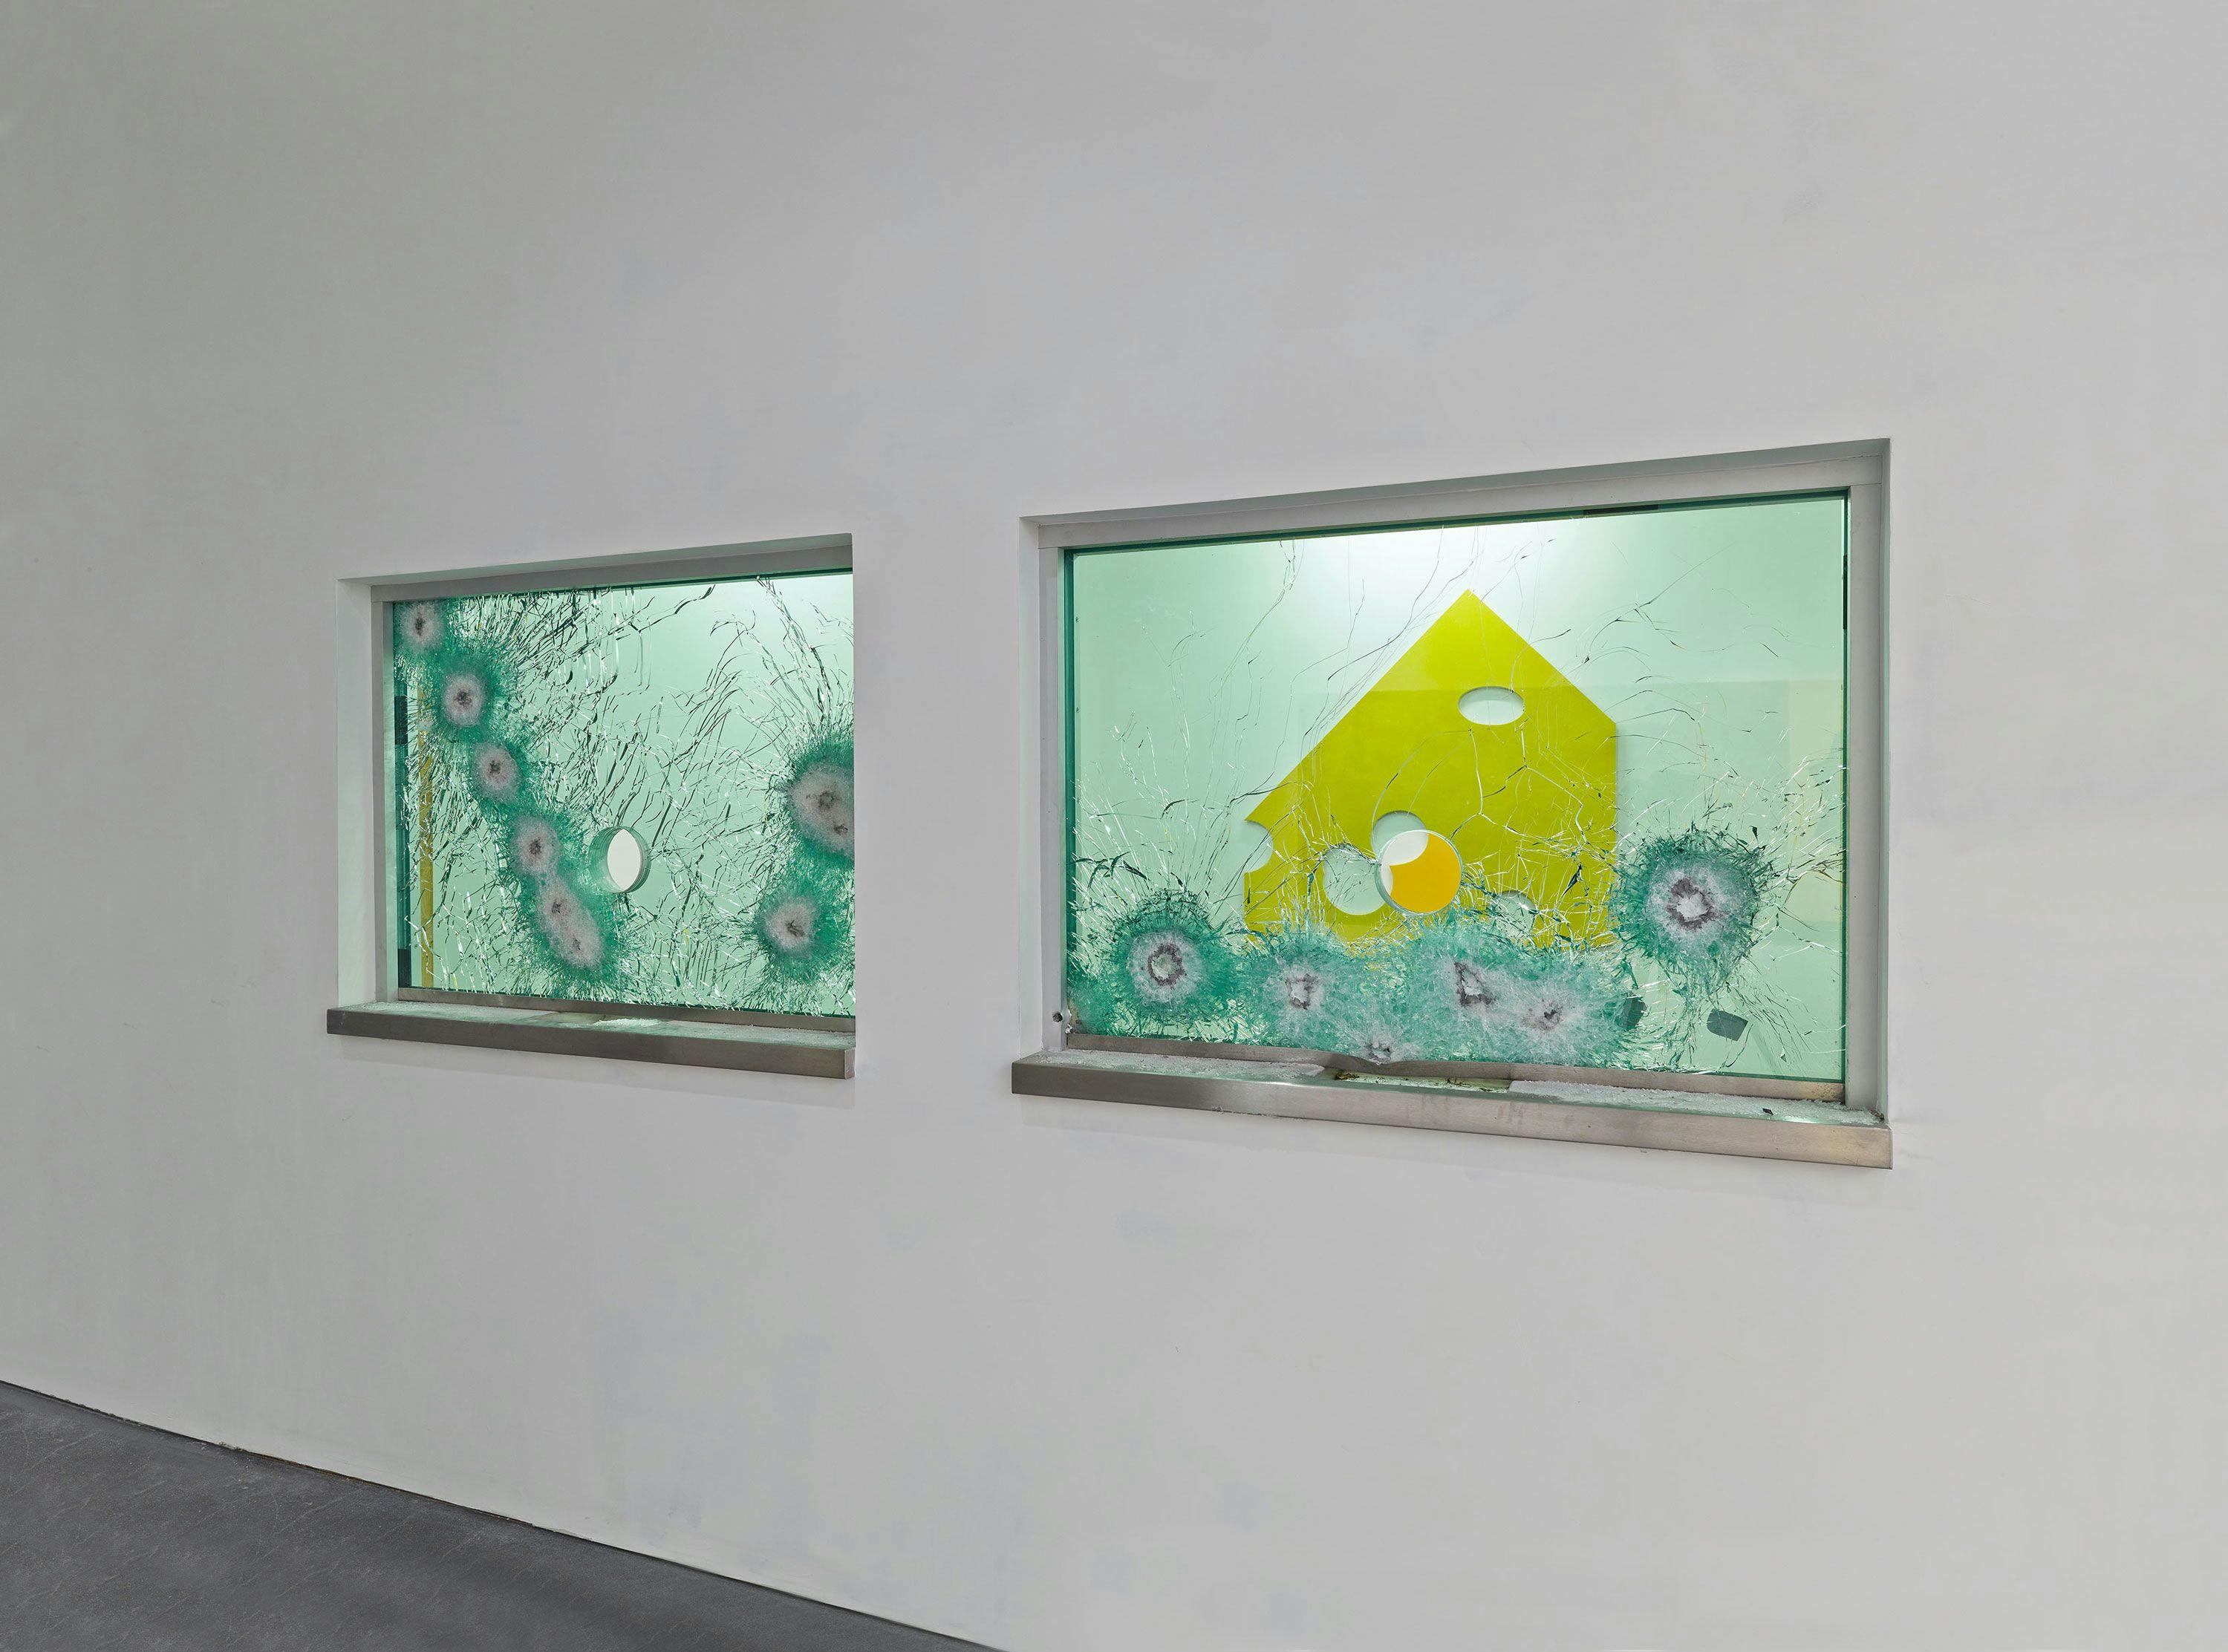 A two part metal, bullet fragments, and glass artwork by Nate Lowman, titled Infinity Window, dated 2012.